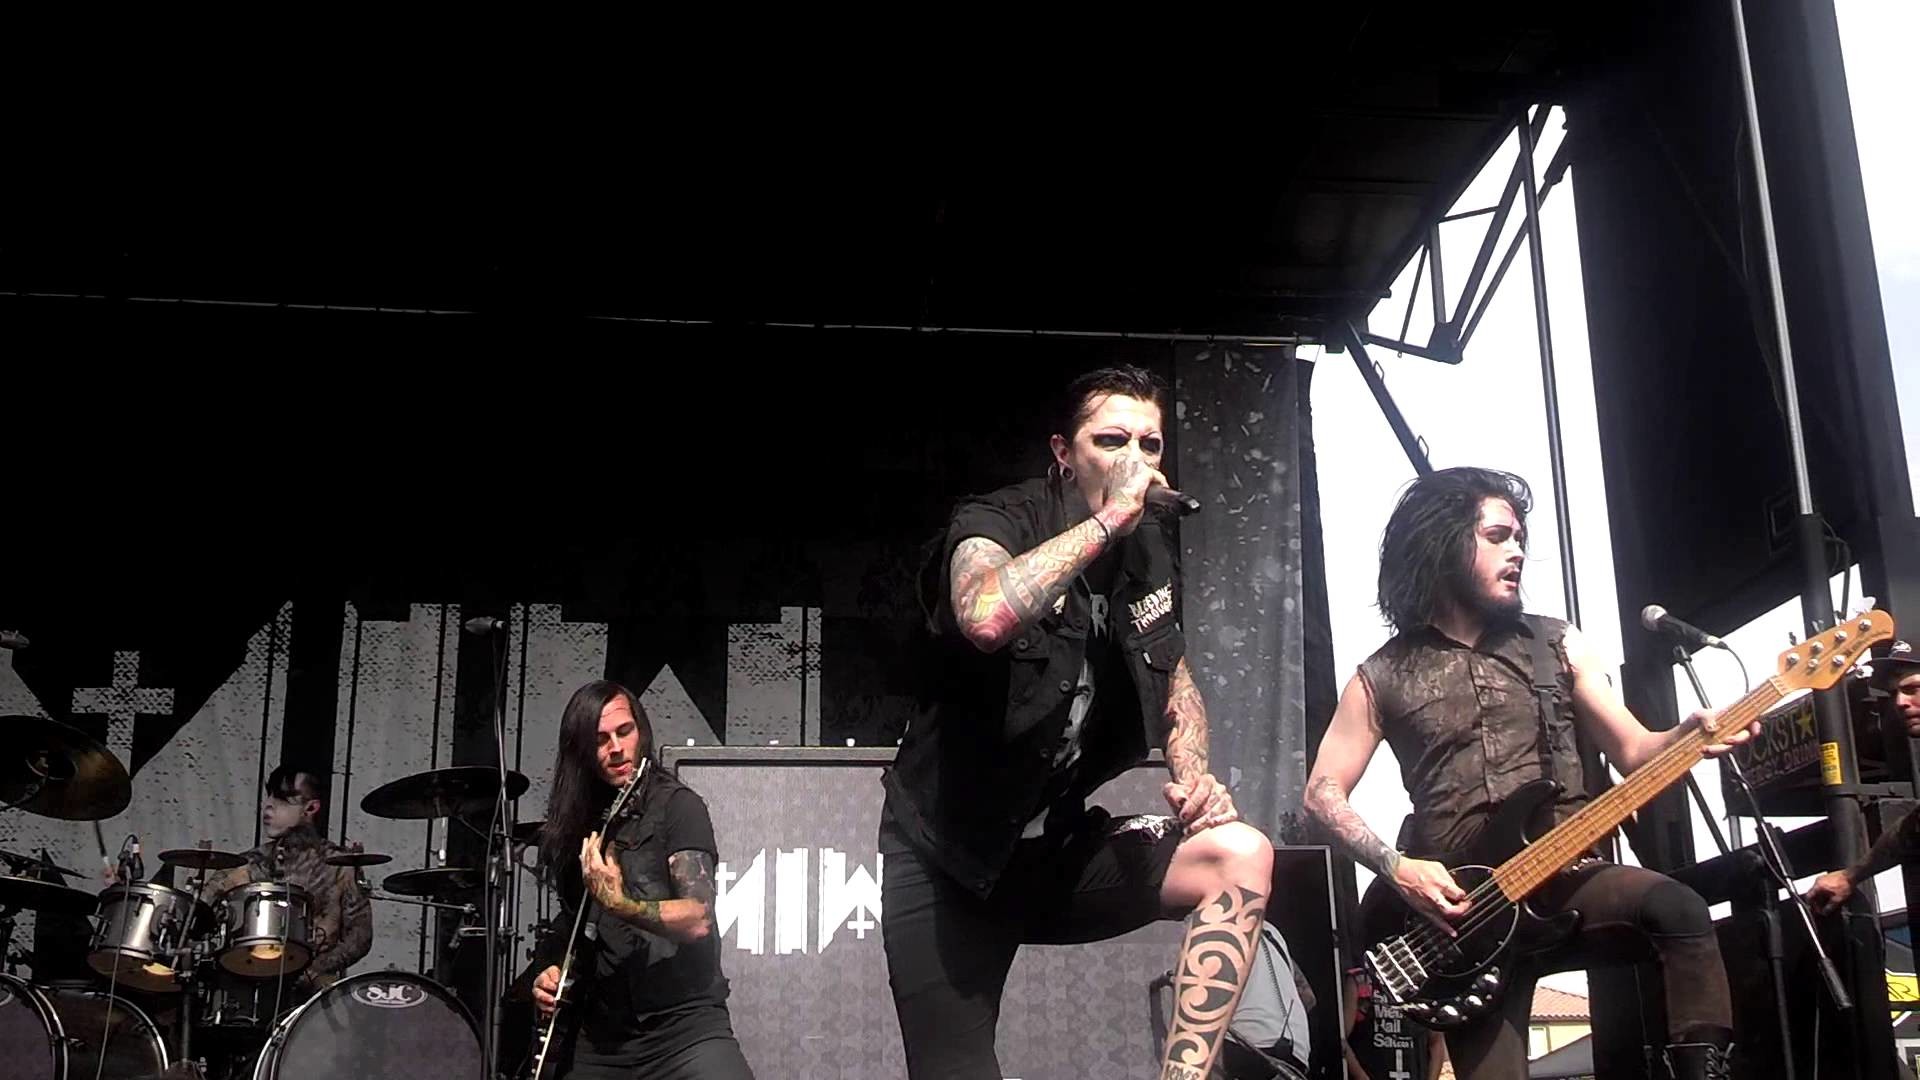 Motionless In White Wallpaper Hd 66 Images - Rock Concert , HD Wallpaper & Backgrounds